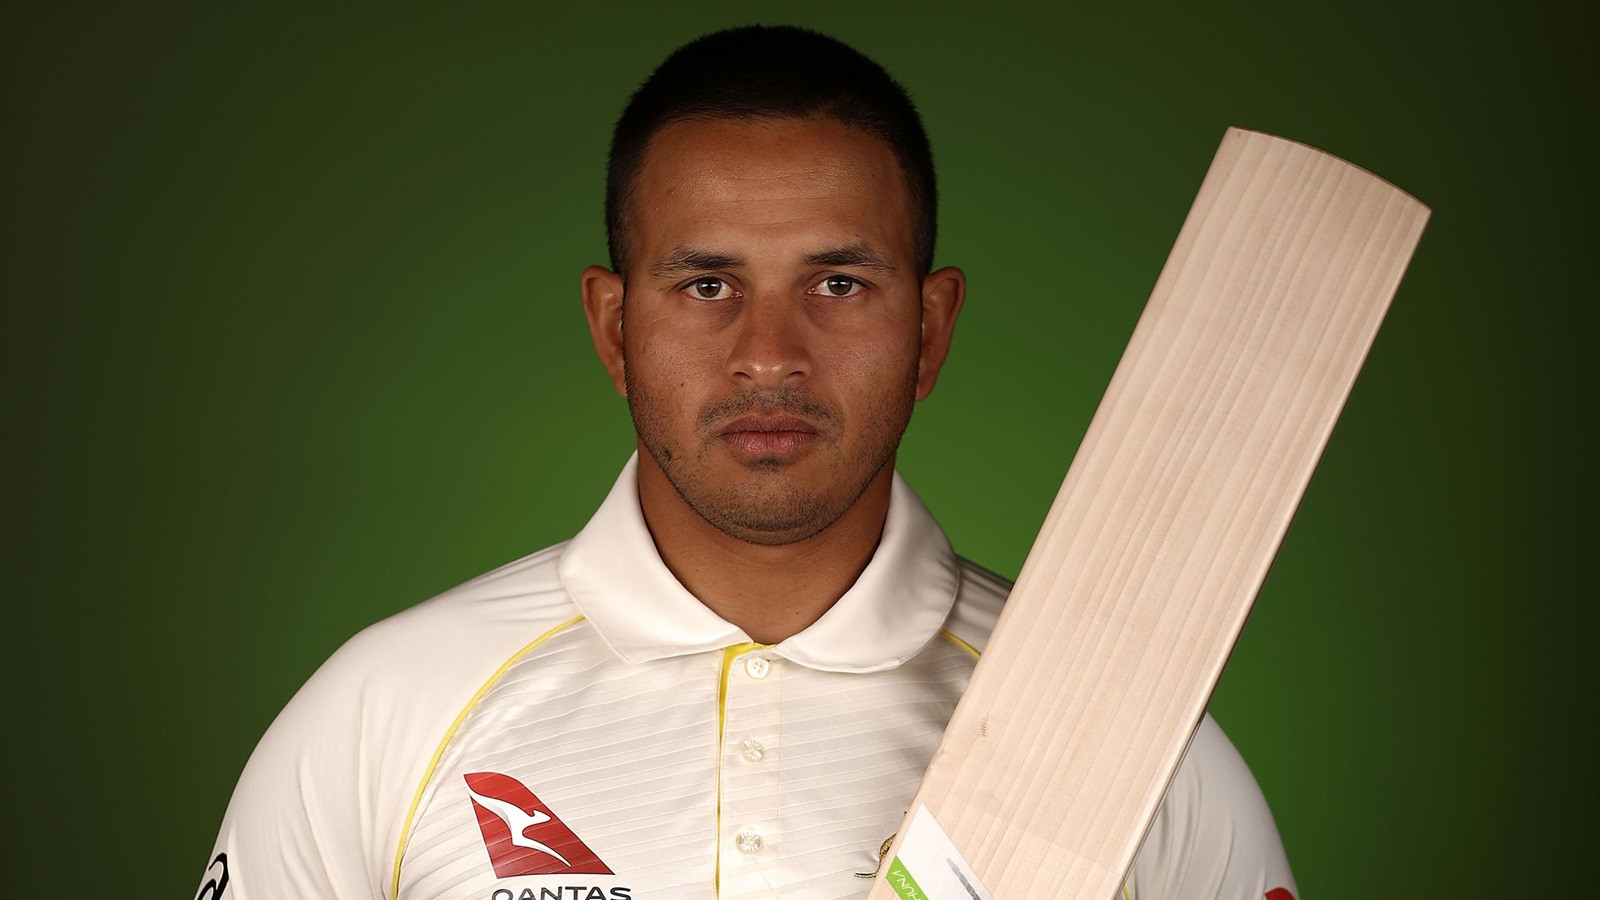 Was told many times I won't play for Australia because of my skin color: Usman Khawaja on racism 